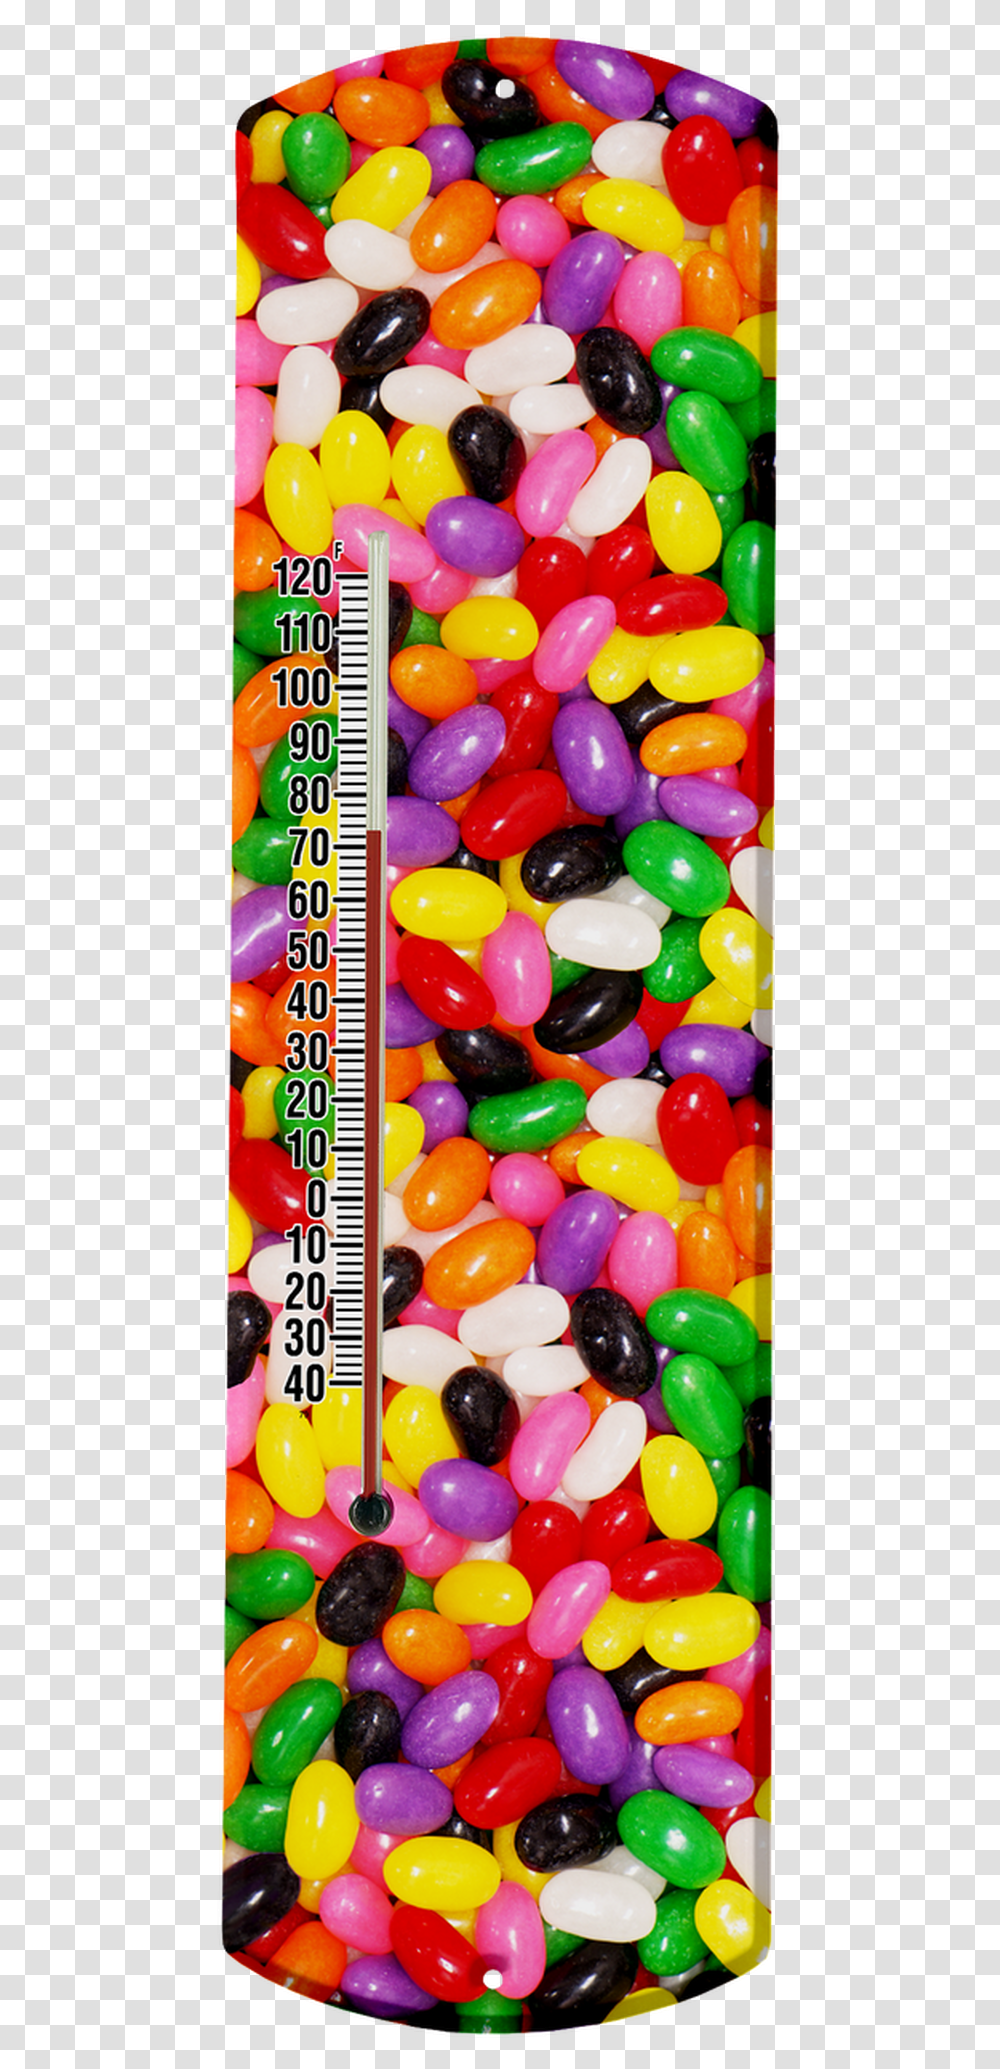 Jelly Beans Jelly Bean, Food, Sweets, Confectionery, Candy Transparent Png